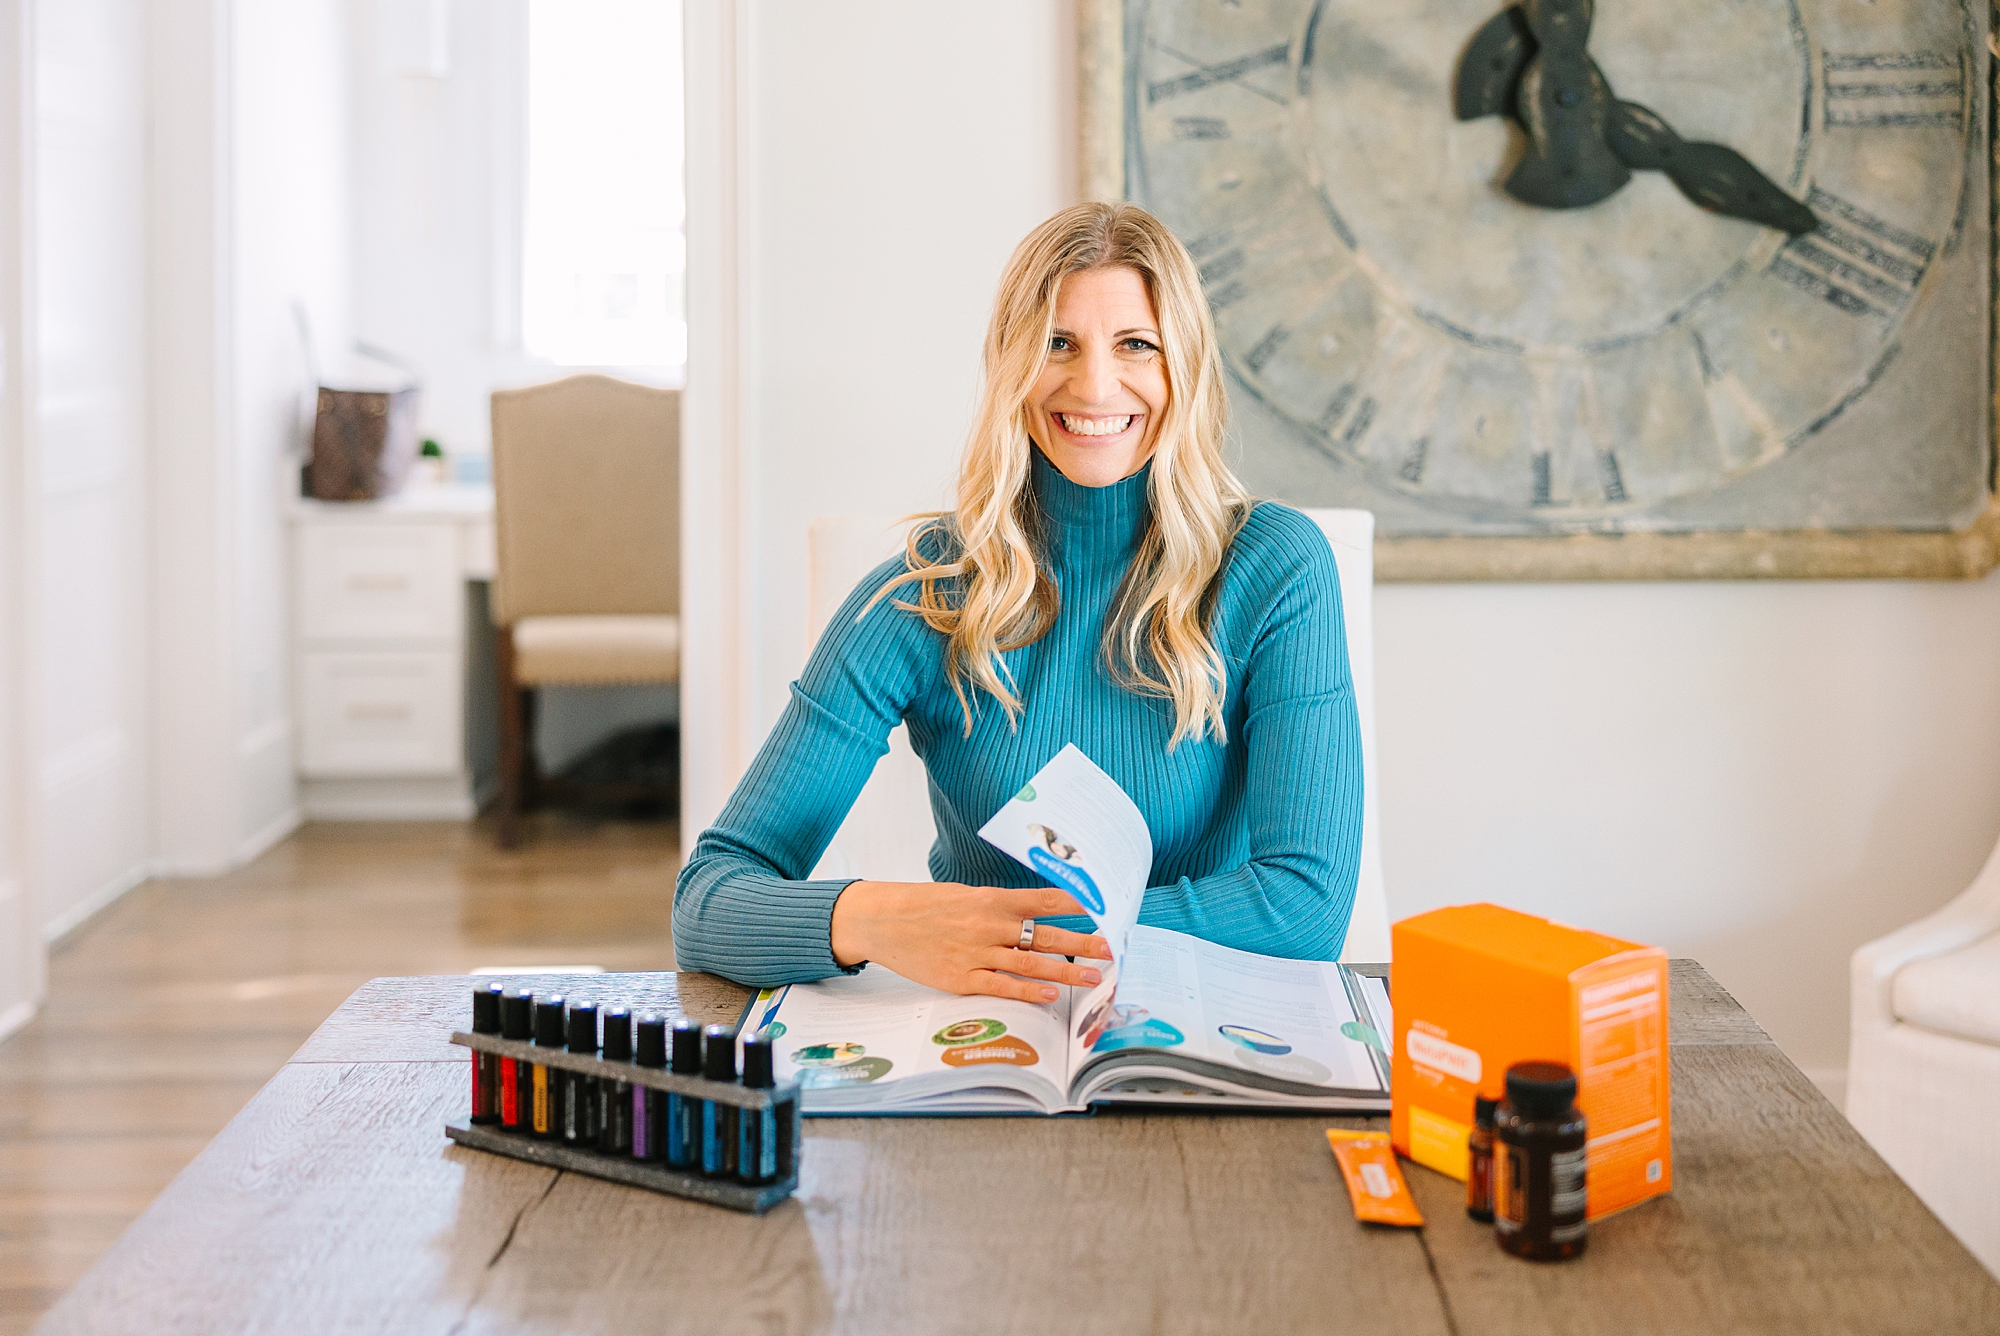 health coach flips through books at dining room table with oils